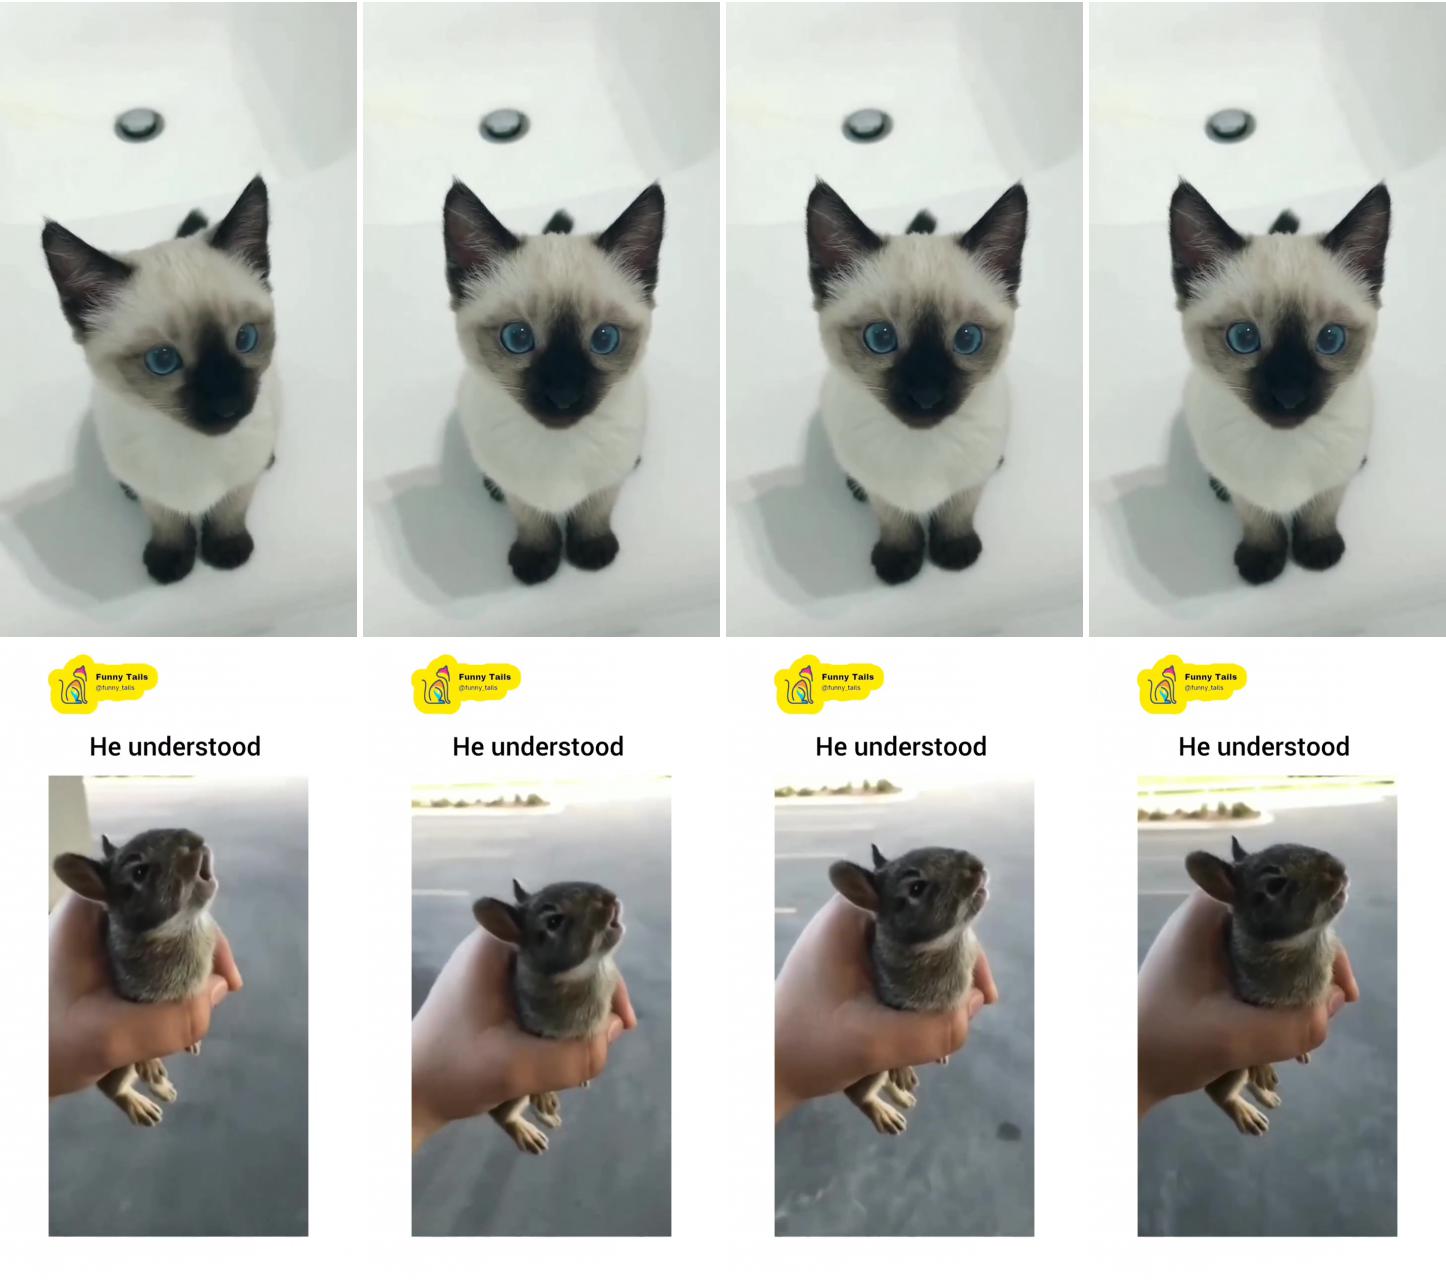 Adorable siamese cat aesthetic video; he thought he is in danger, funny animals video